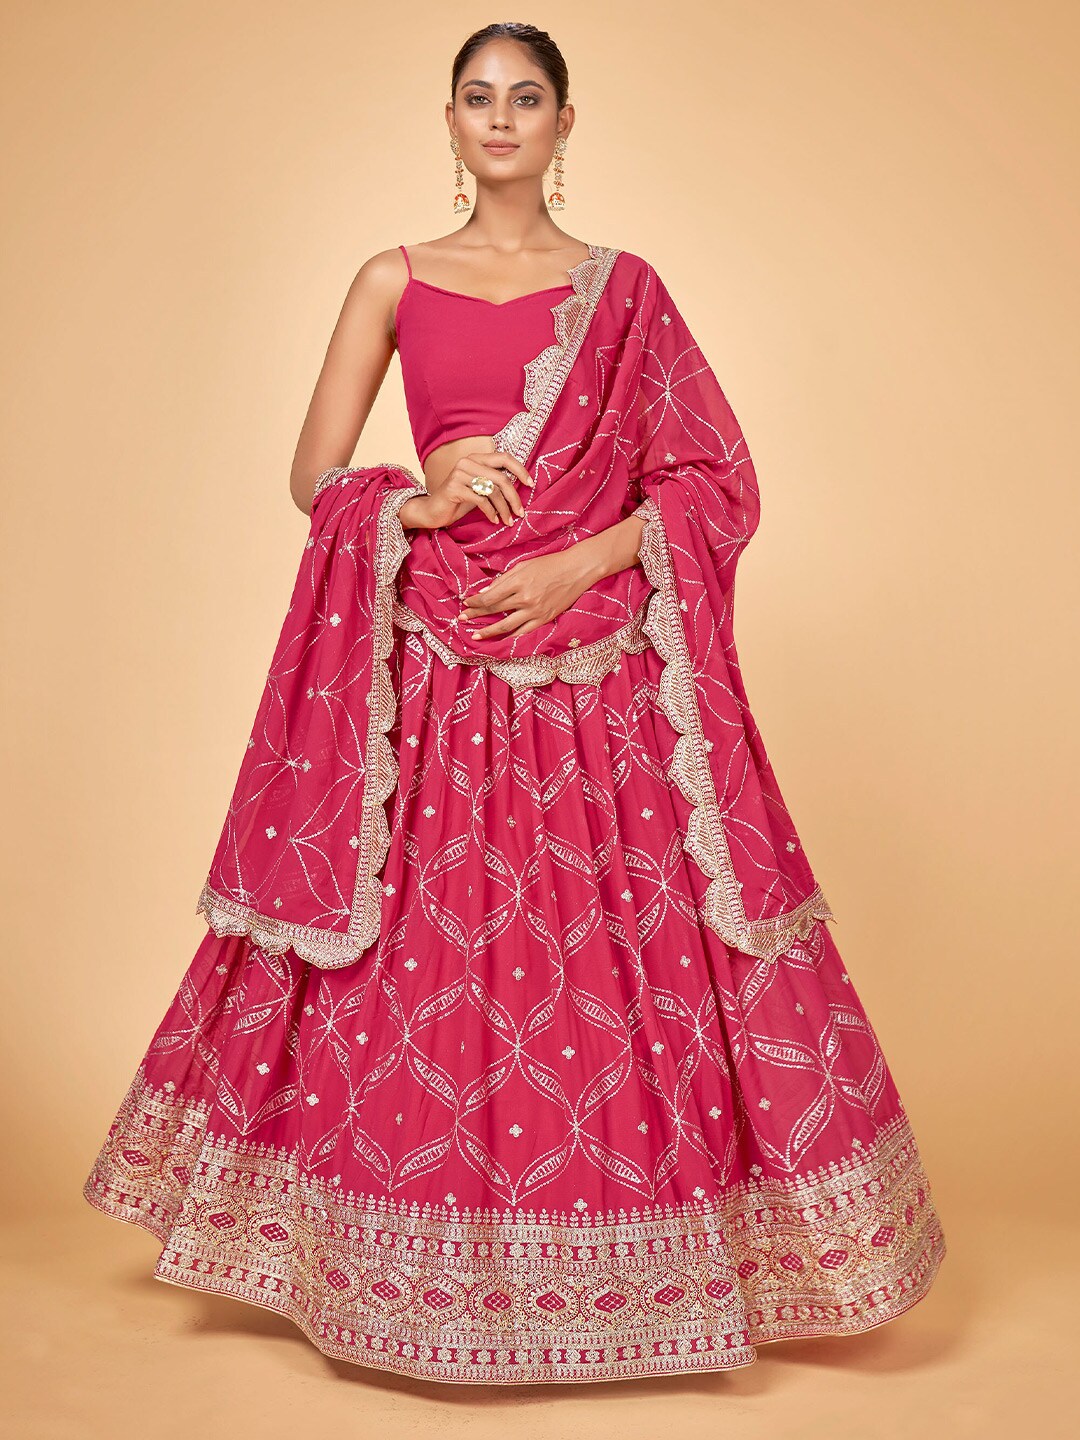 Cloth's Villa Pink & Silver-Toned Sequinned Semi-Stitched Lehenga & Unstitched Blouse With Dupatta Price in India